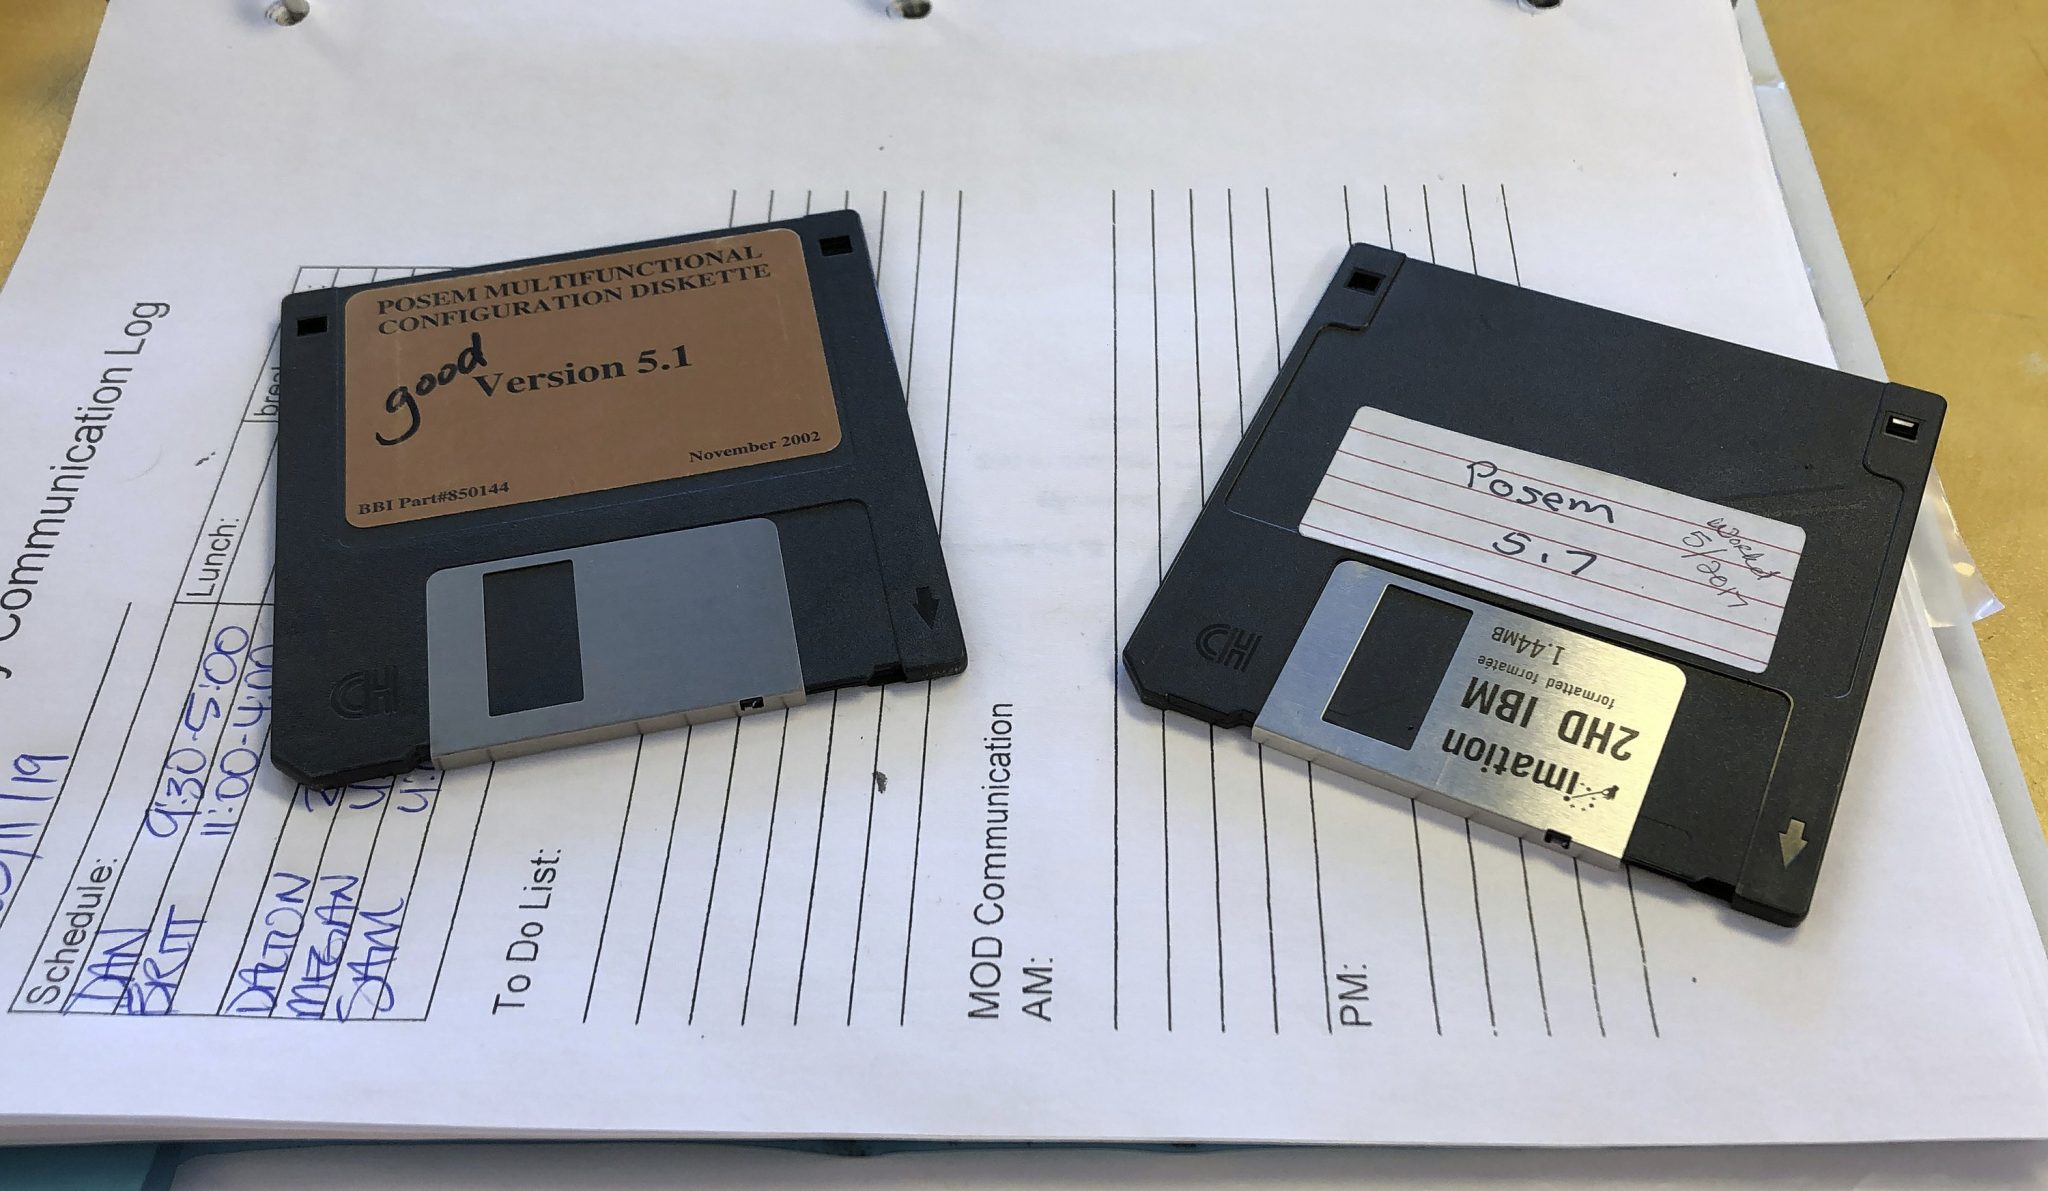 Floppy disks that are used to bootup Blockbuster store in Oregon system.